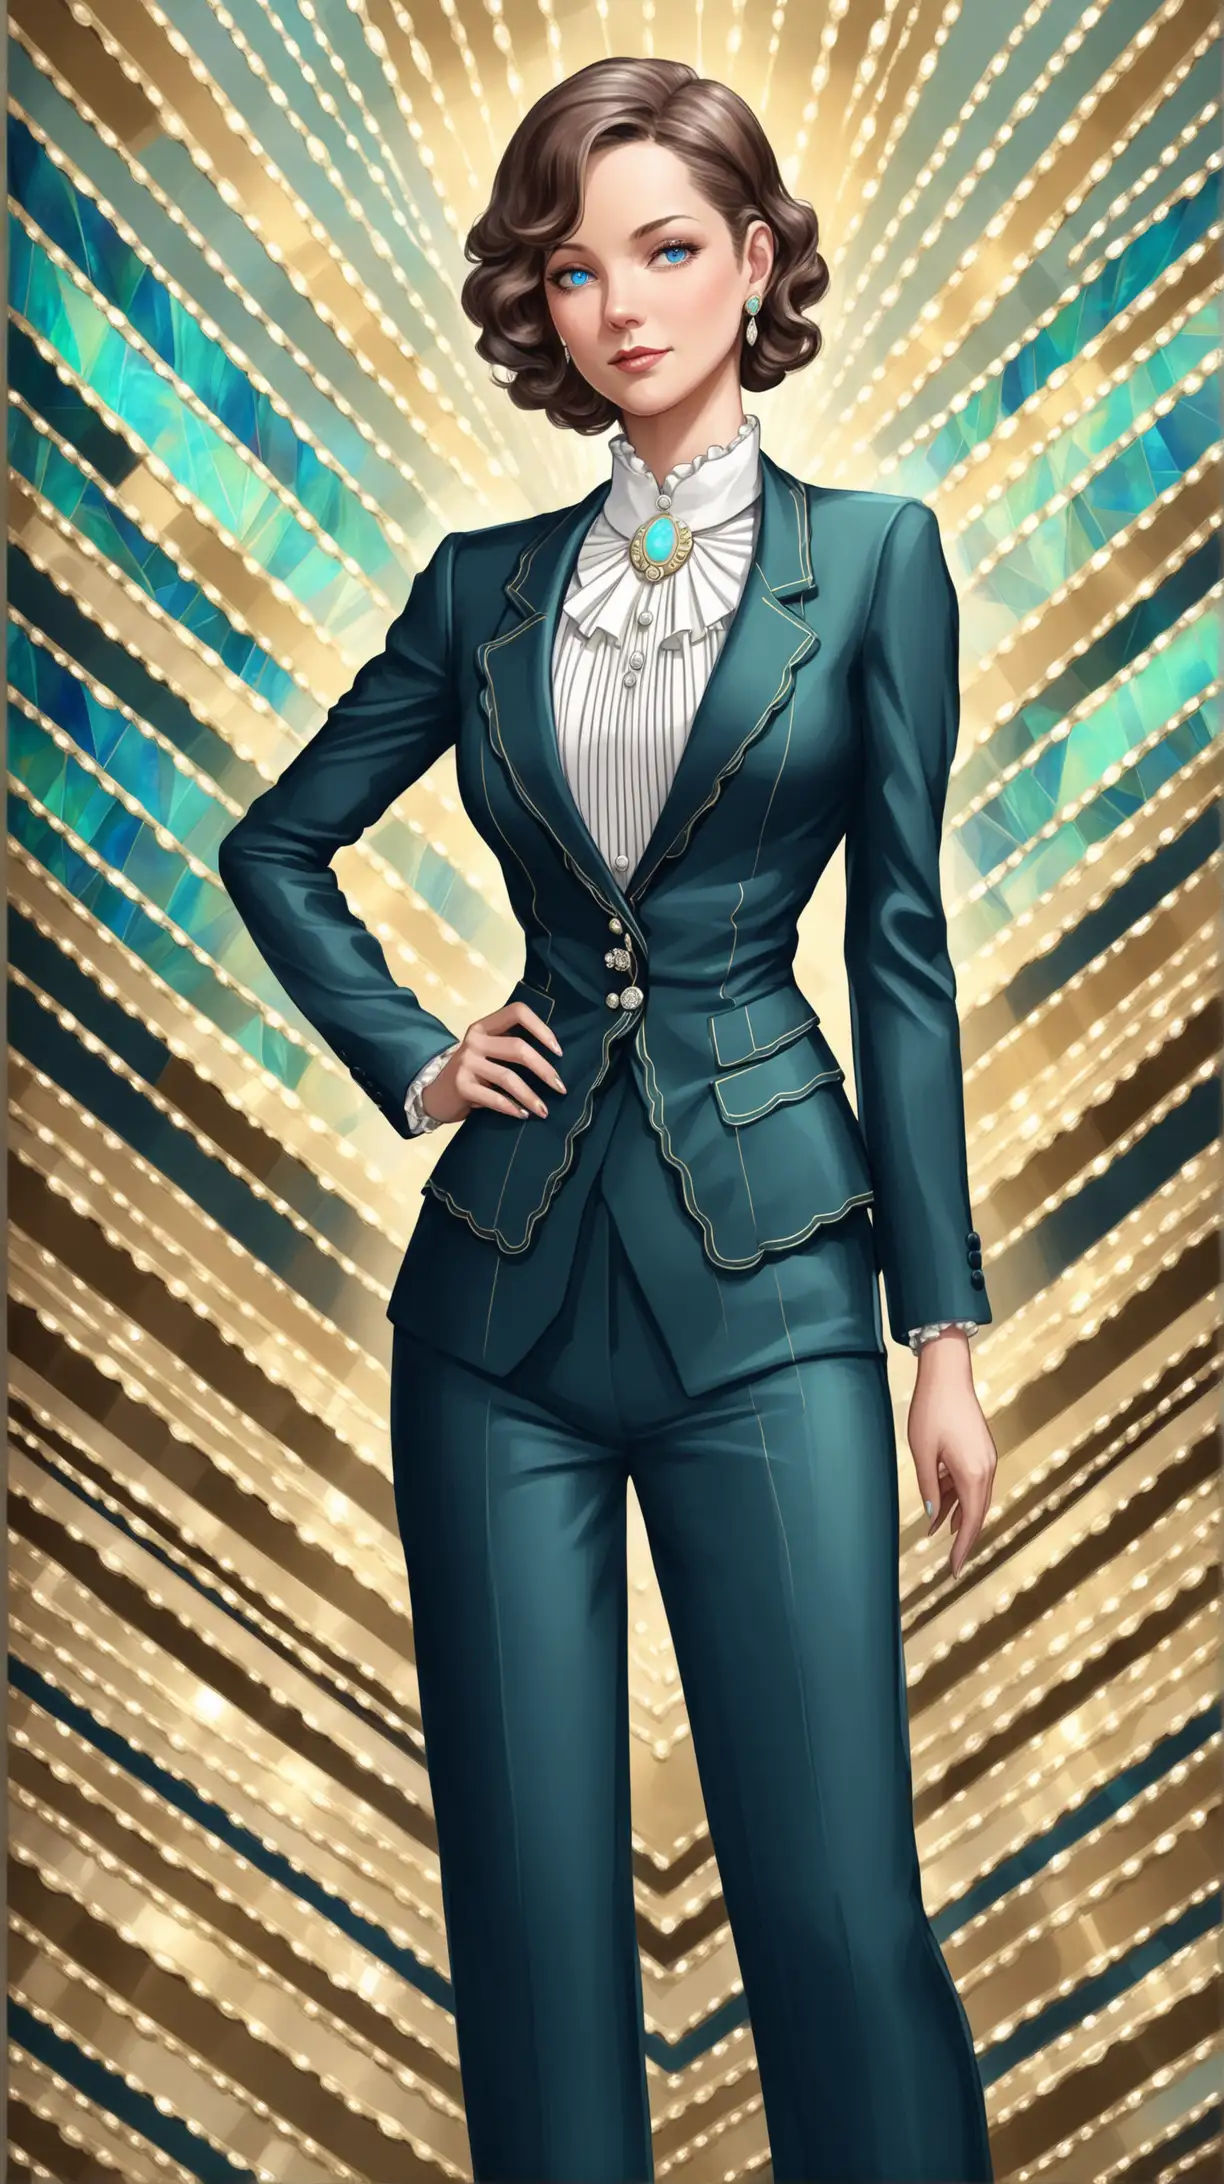 stylish female lawyer in a formal pantsuit decorated with art deco lines, a ruffled button blouse underneath, and classy opal jewelry